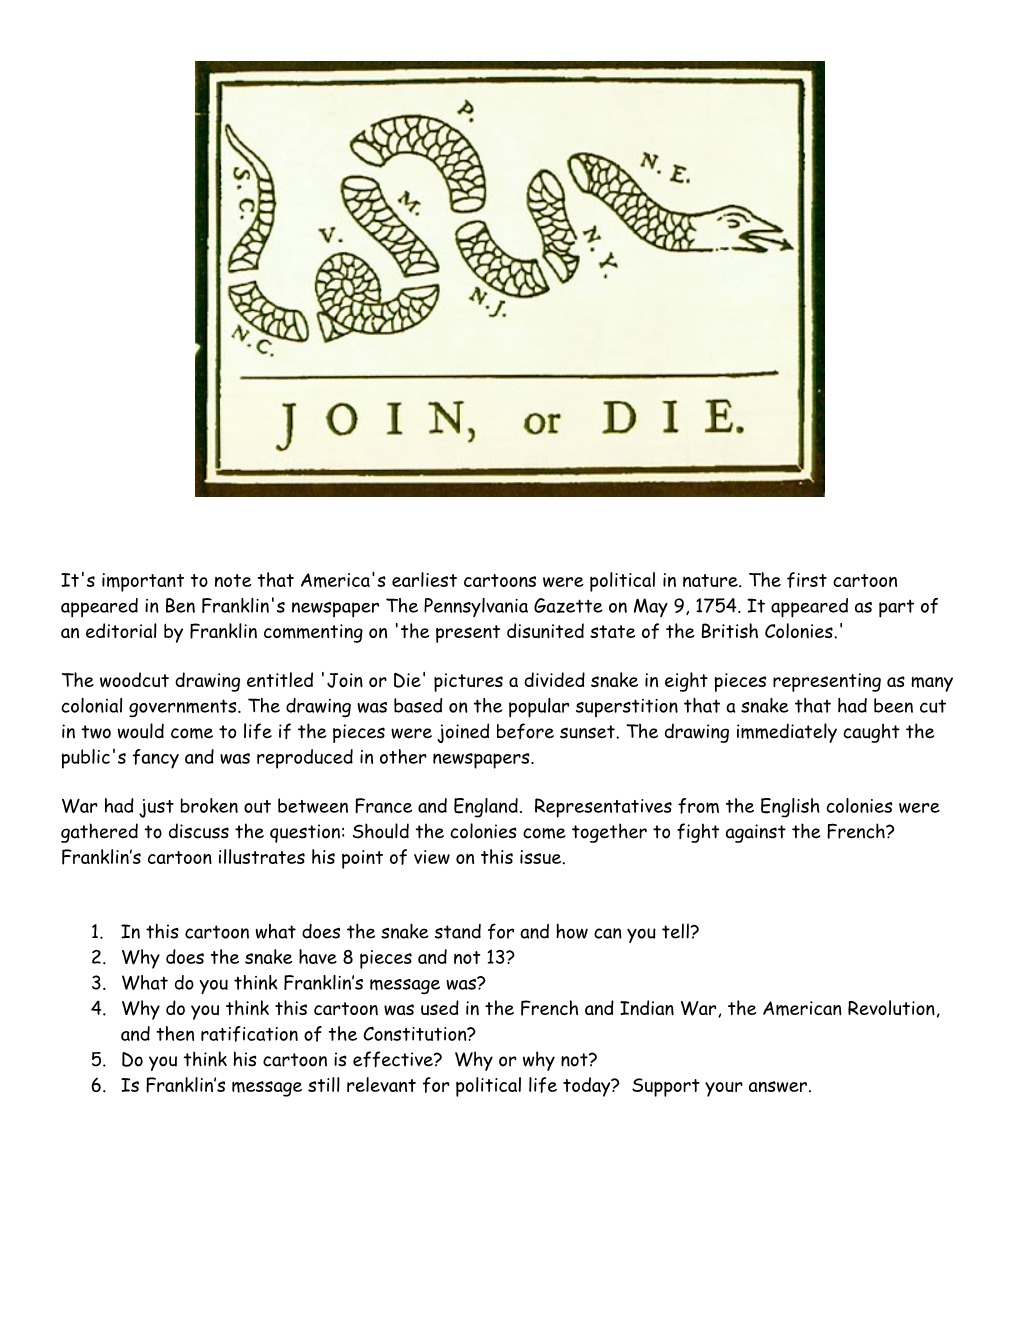 The Woodcut Drawing Entitled 'Join Or Die' Pictures a Divided Snake in Eight Pieces Representing